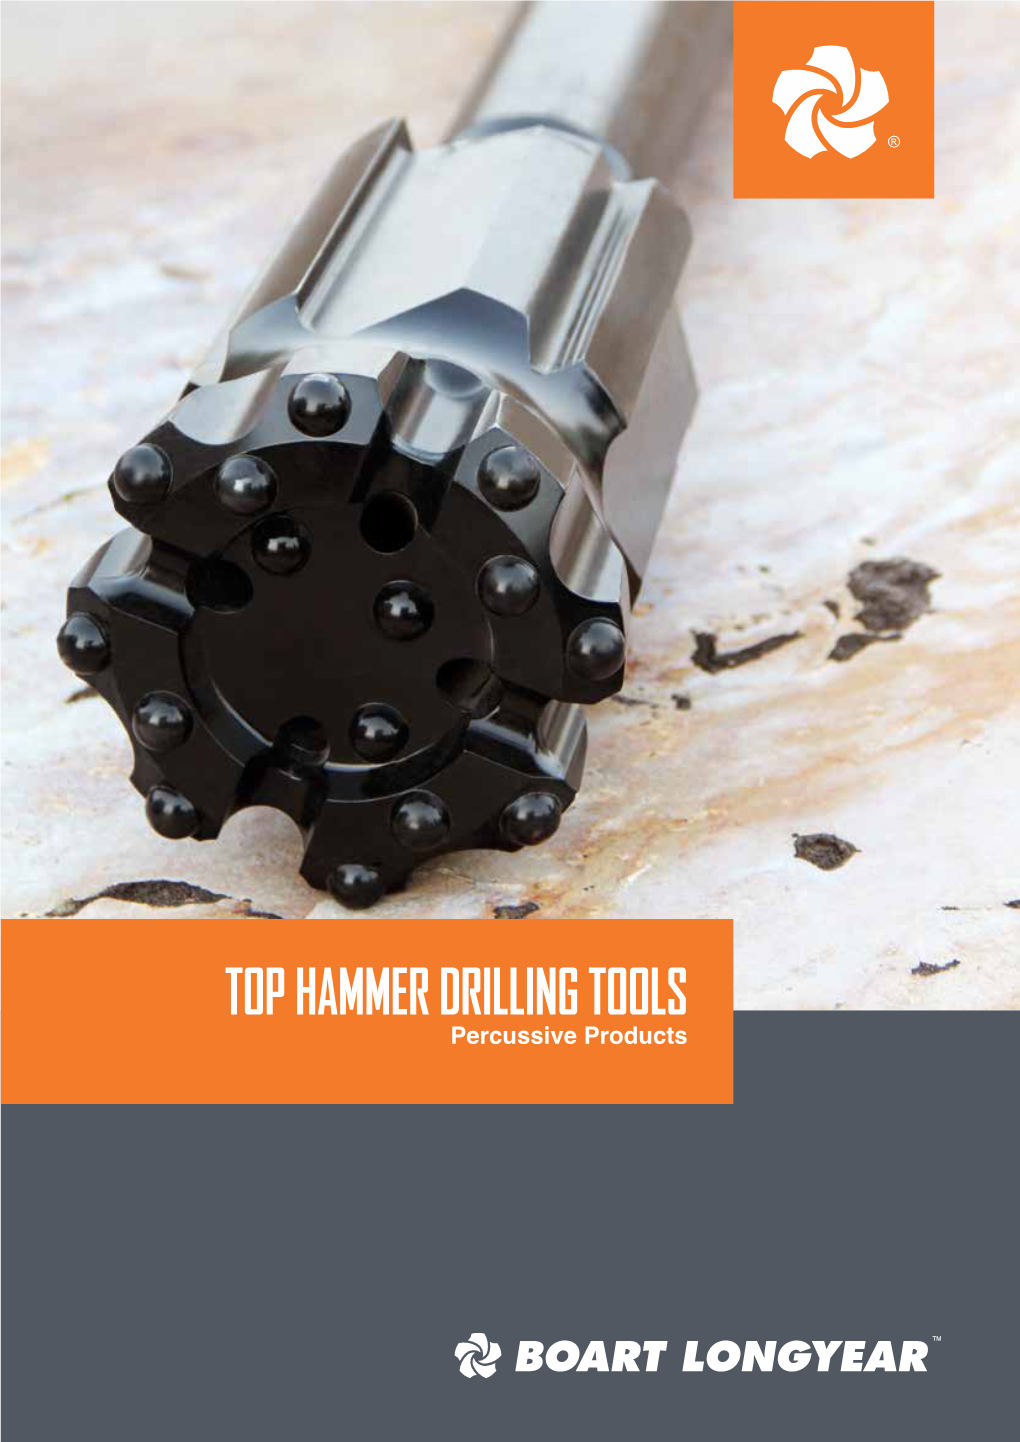 TOP HAMMER DRILLING TOOLS Percussive Products 2 © Copyright 2015 Boart Longyear